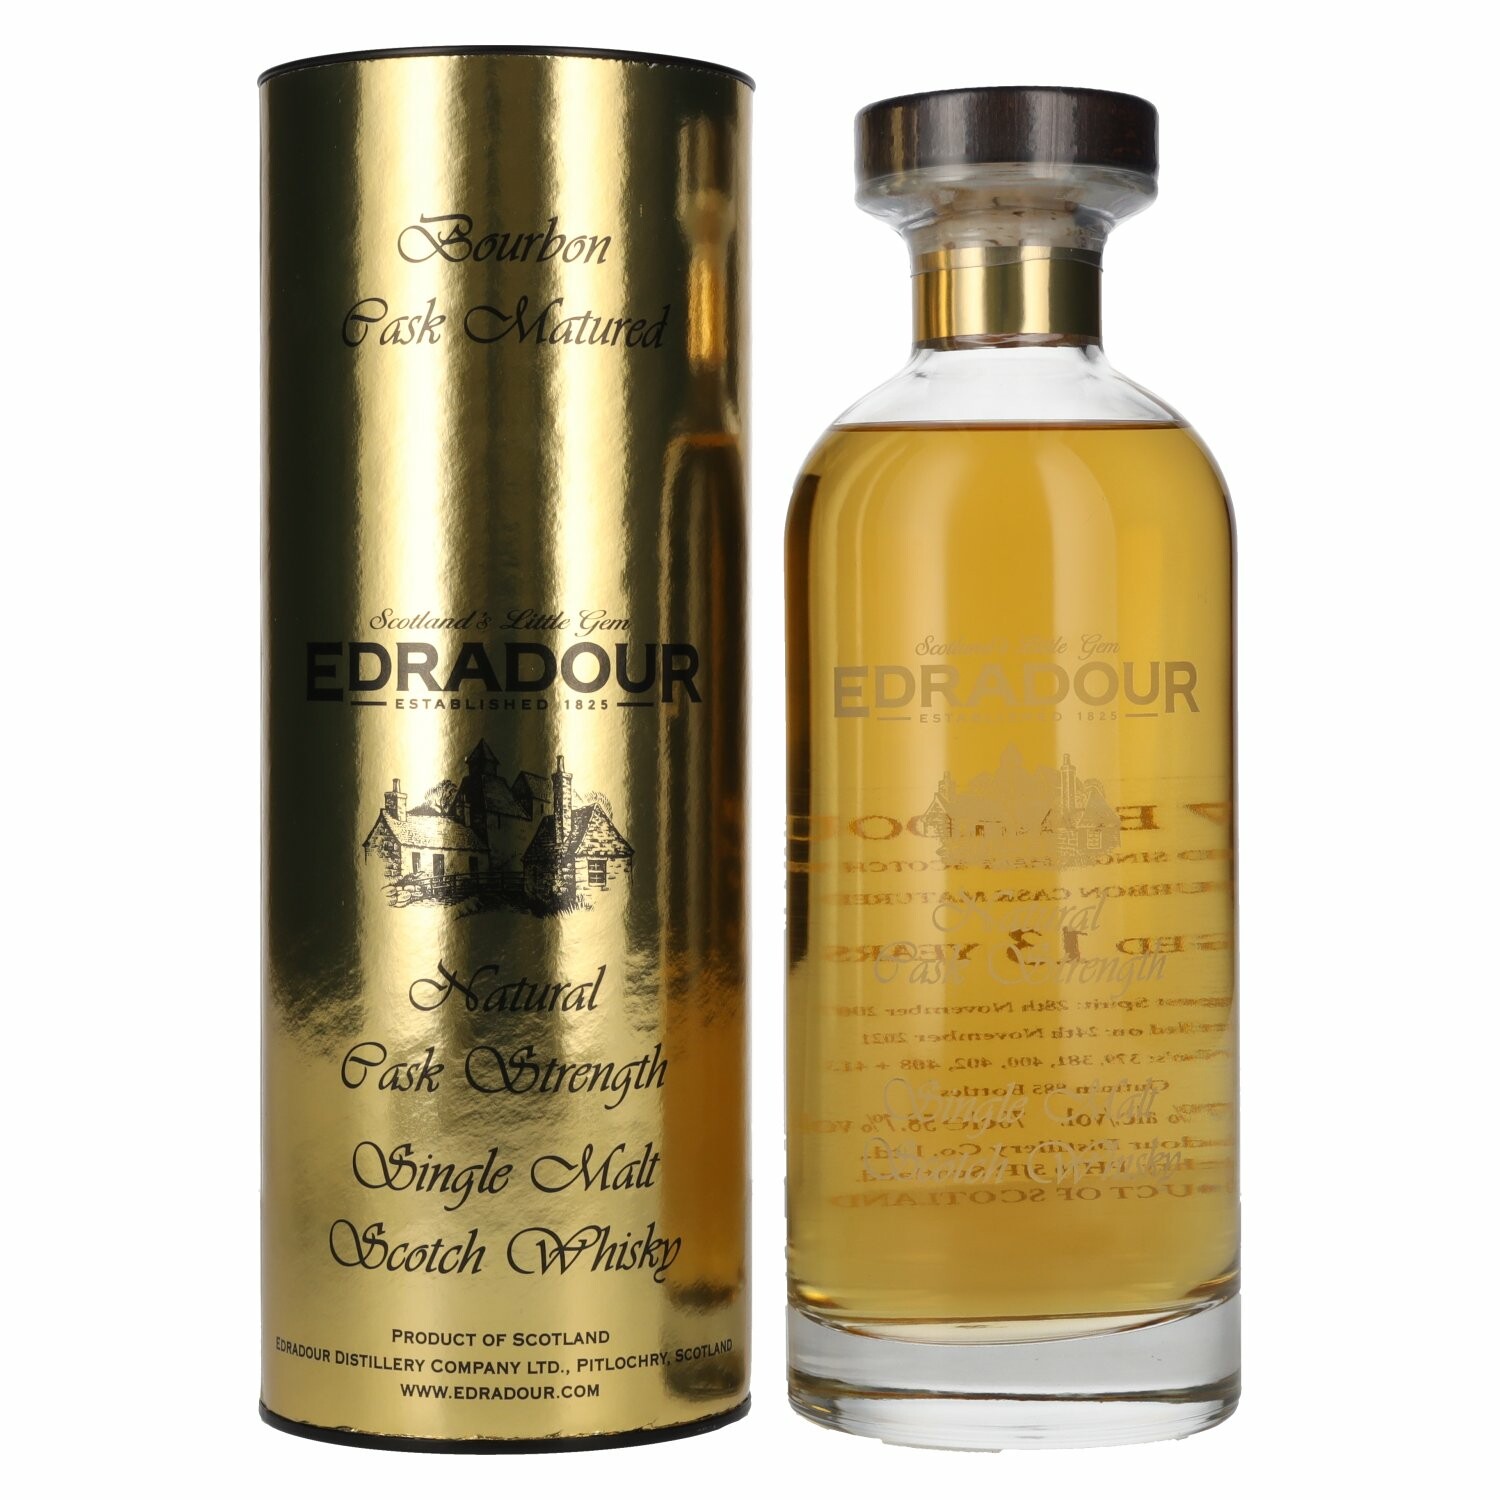 Edradour 13 Years Old Bourbon Matured Natural Cask Strength 2007 58,7% Vol. 0,7l in Giftbox